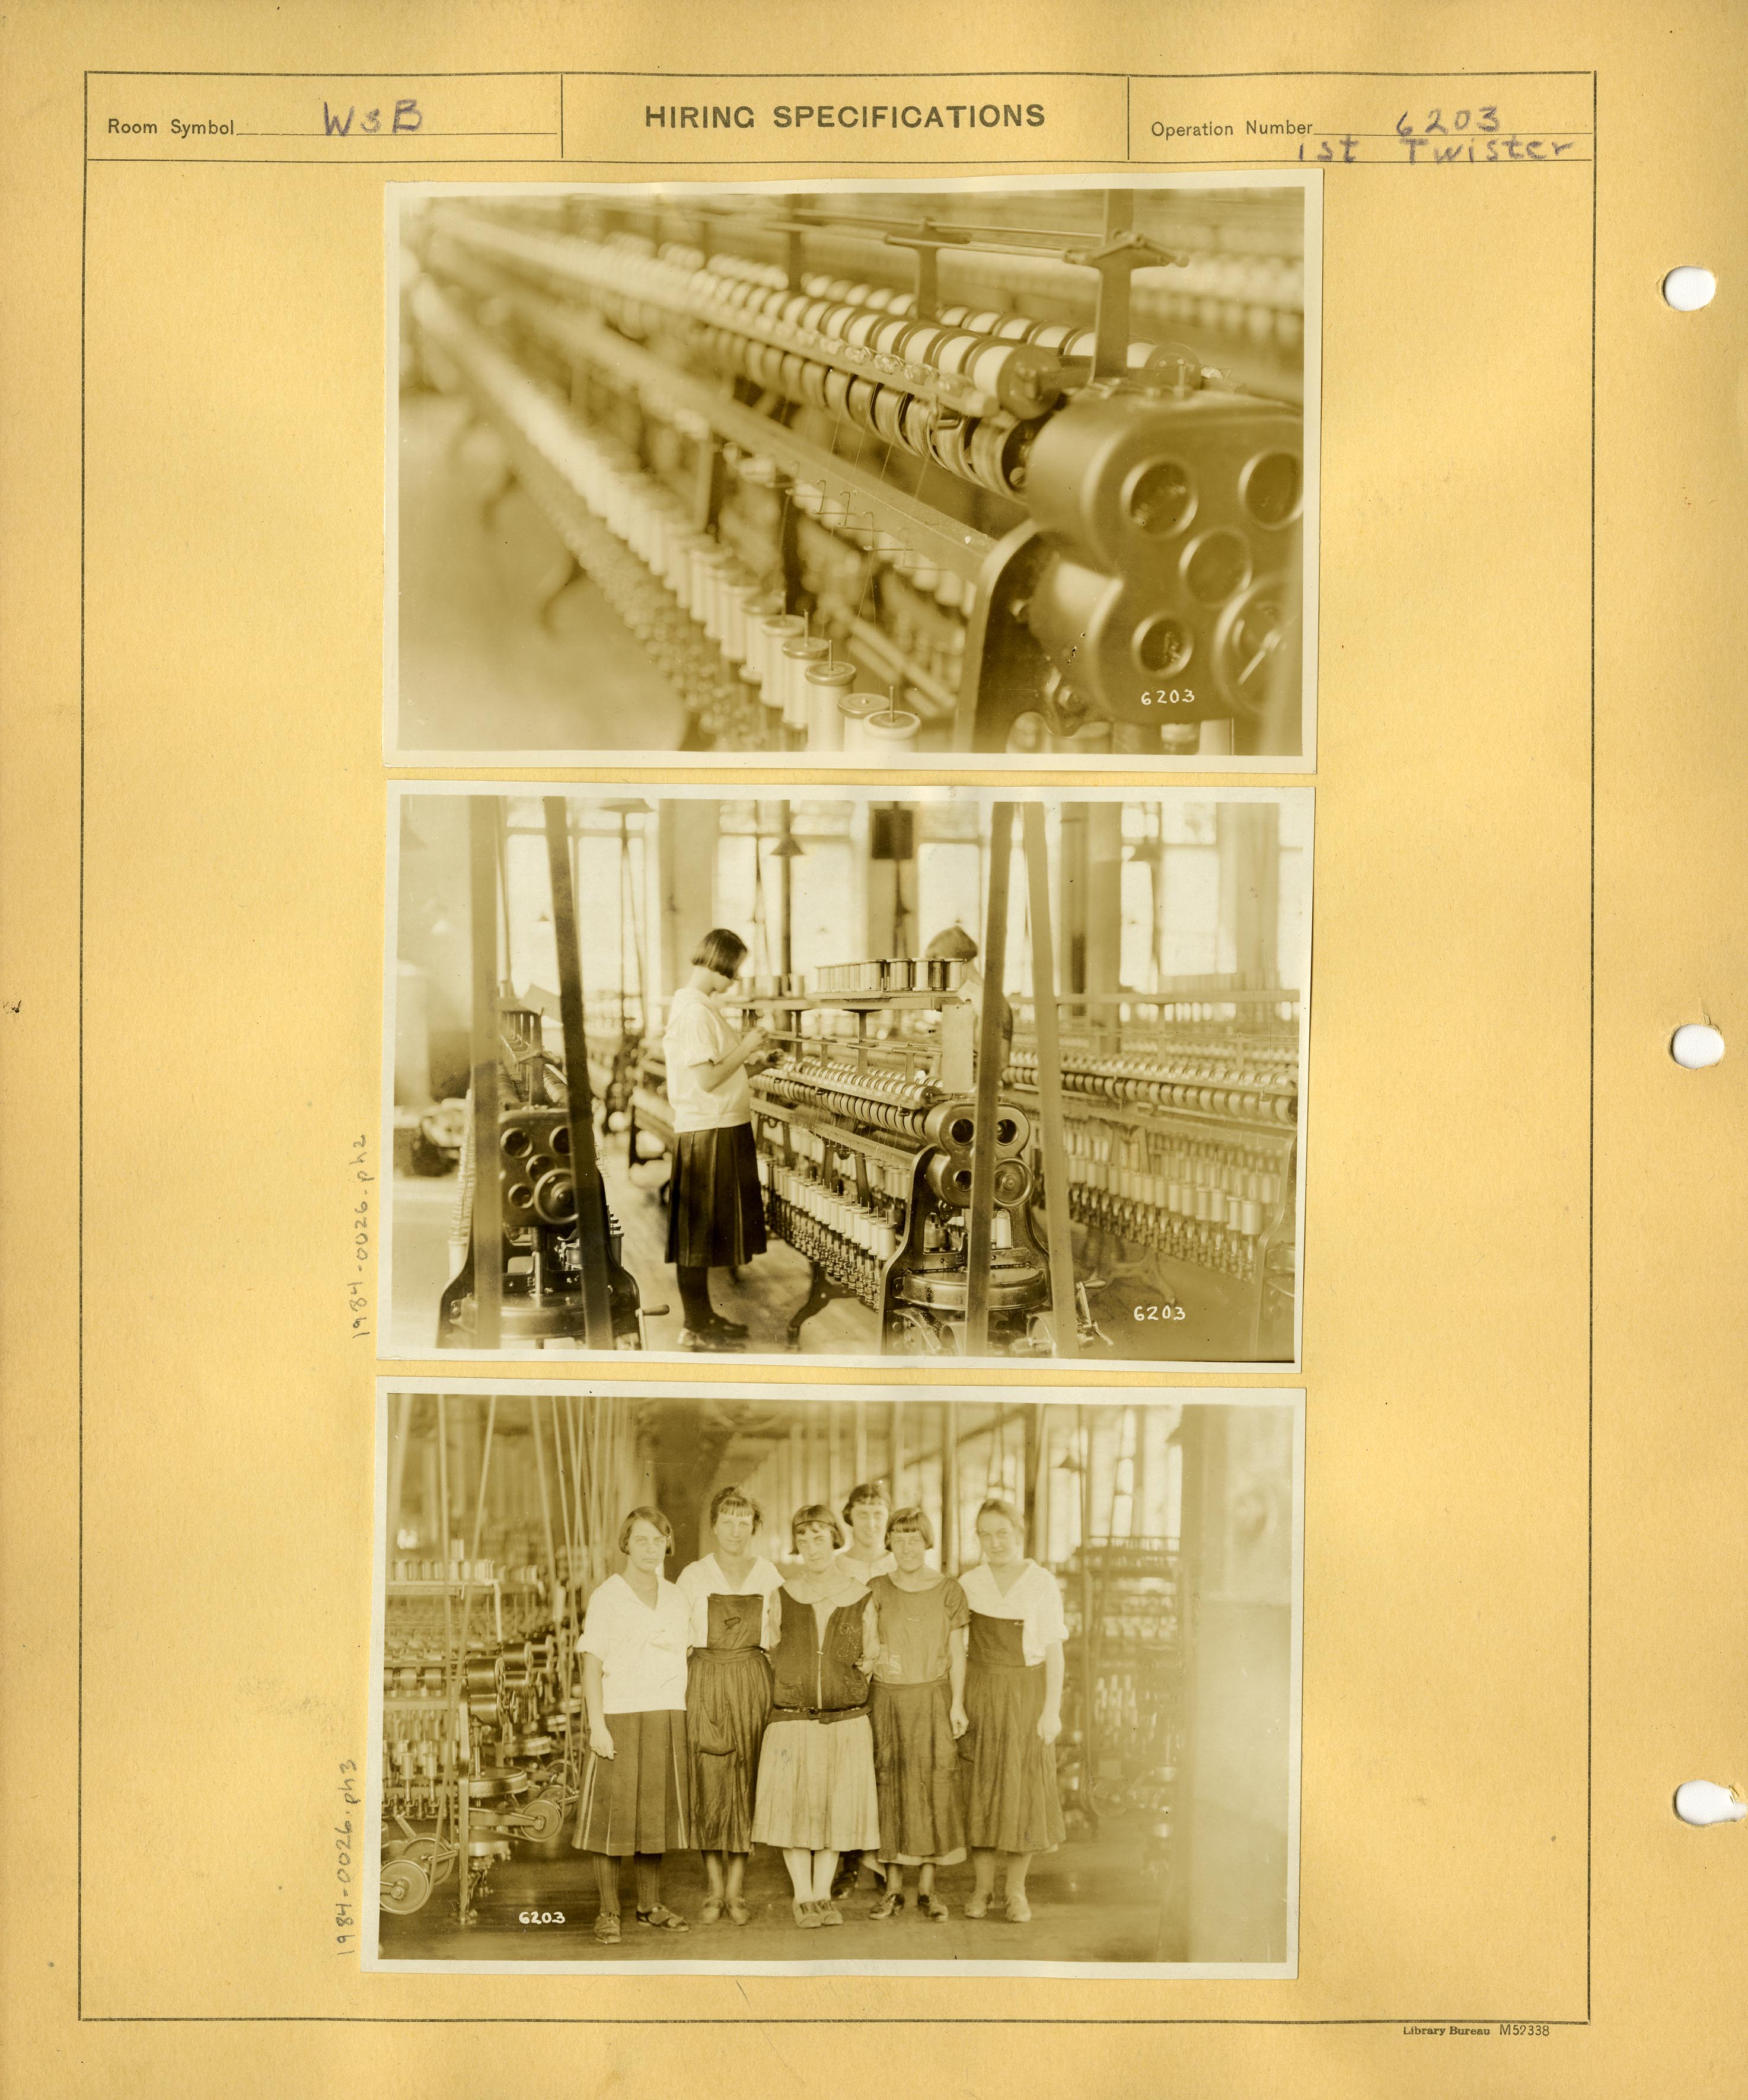 Cheney Brothers Silk Manufacturing Company hiring specification for a 1st Twister, ca. mid-1920s